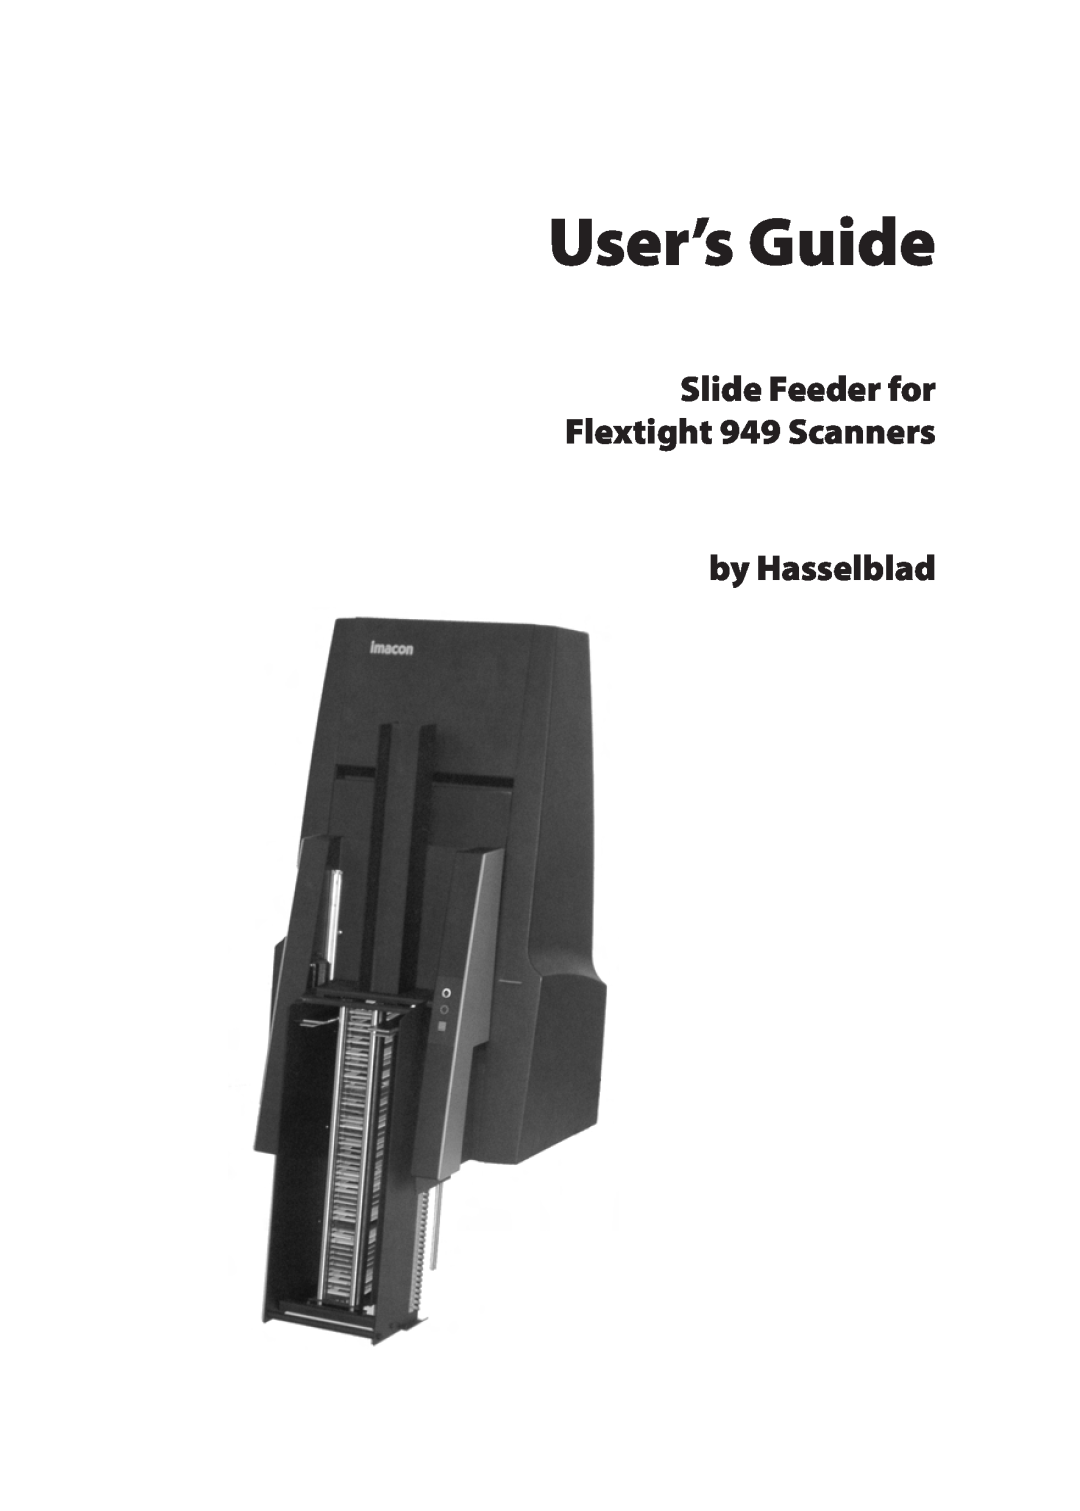 Hasselblad manual by Hasselblad, User’s Guide, Slide Feeder for Flextight 949 Scanners 